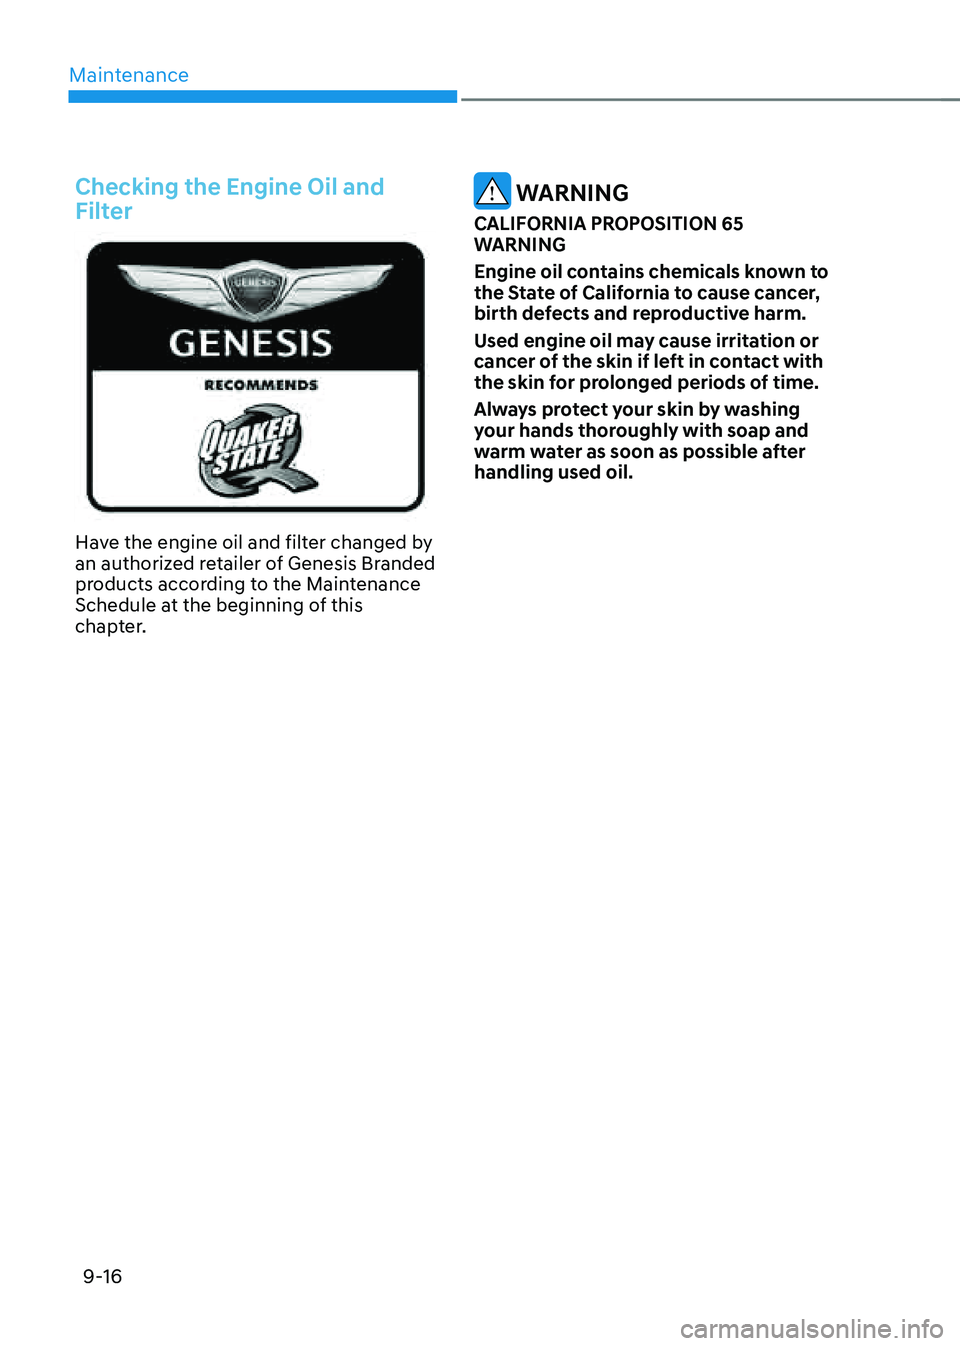 GENESIS GV80 2021  Owners Manual Maintenance
9-16
Checking the Engine Oil and 
Filter
Have the engine oil and filter changed by an authorized retailer of Genesis Branded 
products according to the Maintenance 
Schedule at the beginni